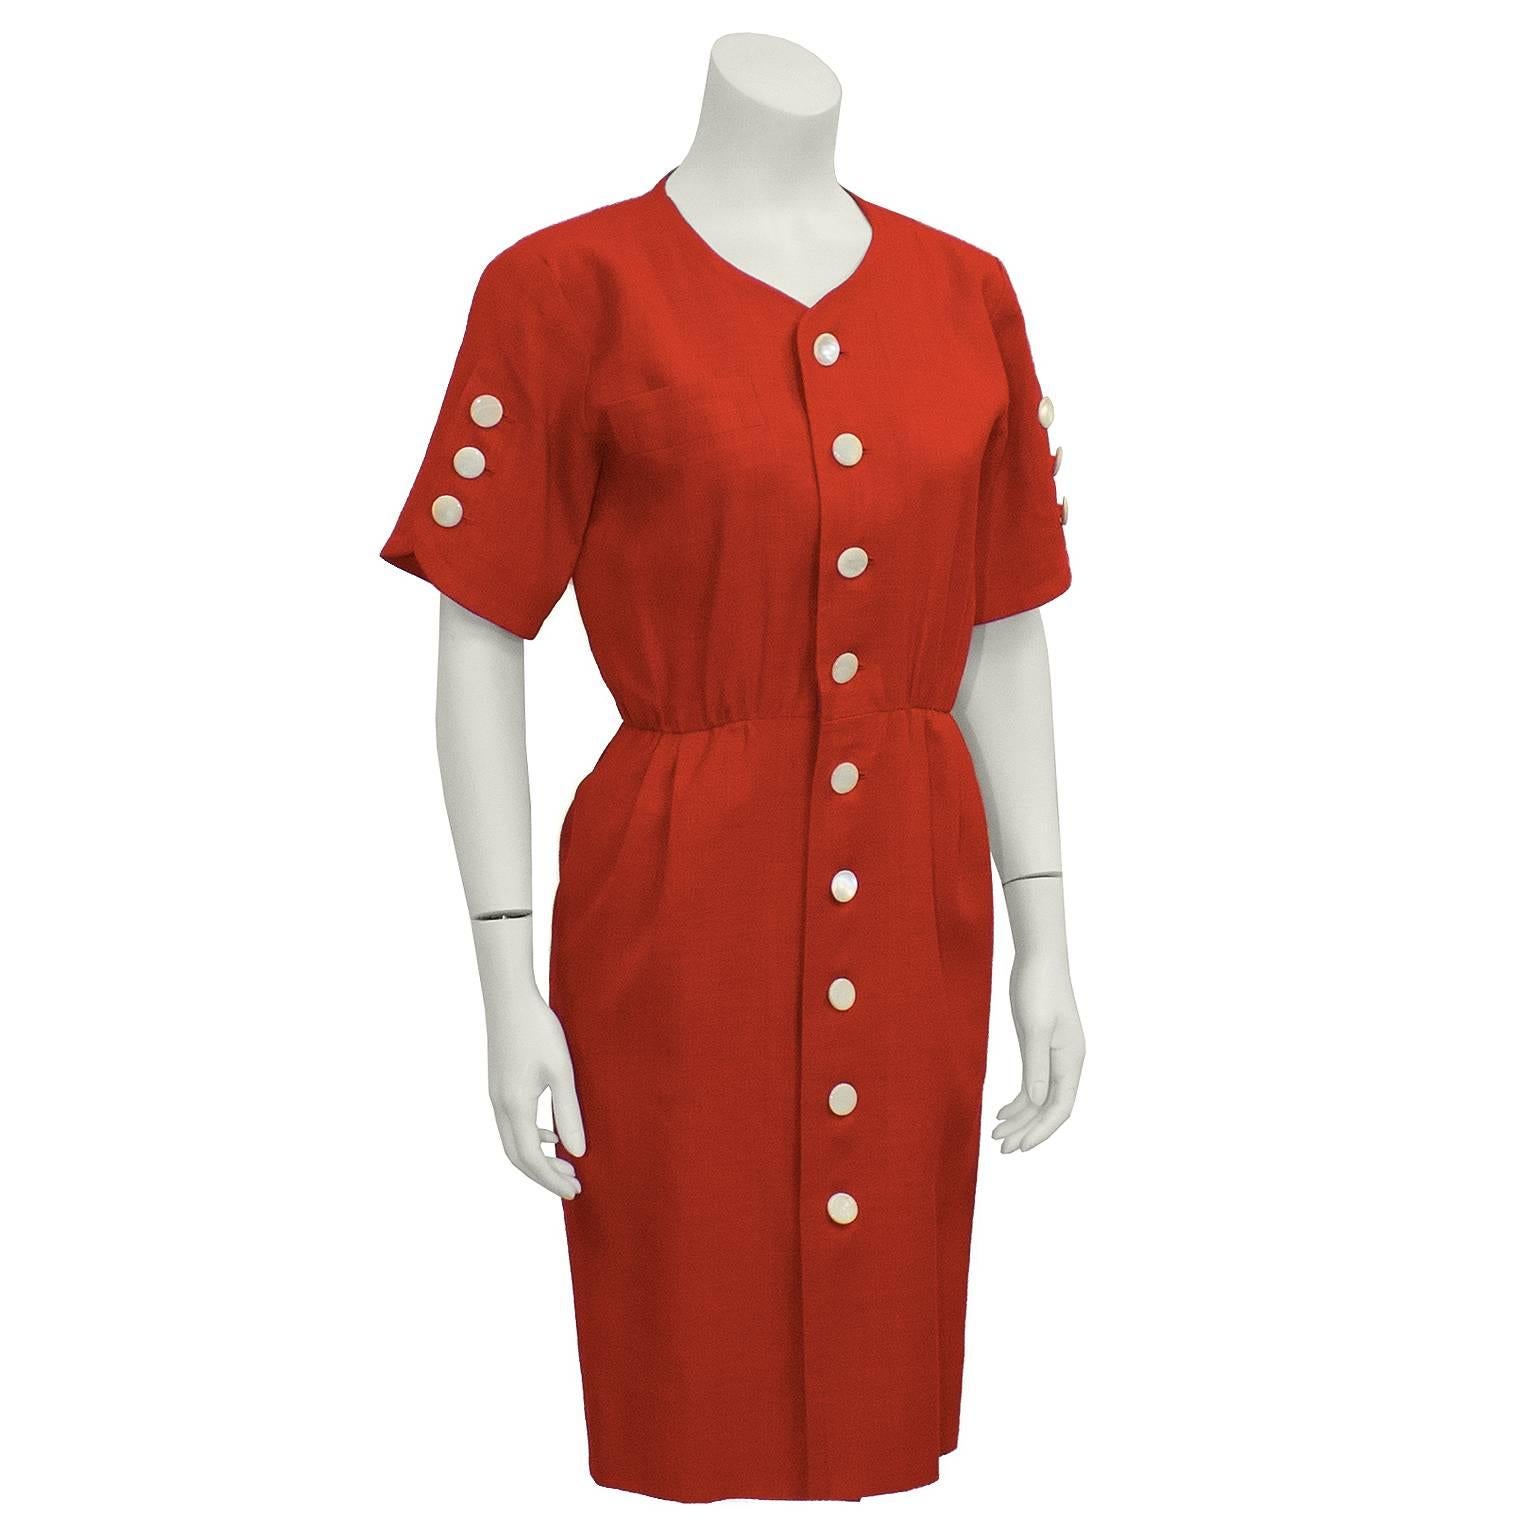 Adorable Yves Saint Laurent red linen dress that dates from the 1980's. Slim cut, with short sleeves and a small flap pocket on right breast. Small pleats around the waist line. Medium plastic white buttons down the front center, and three on each